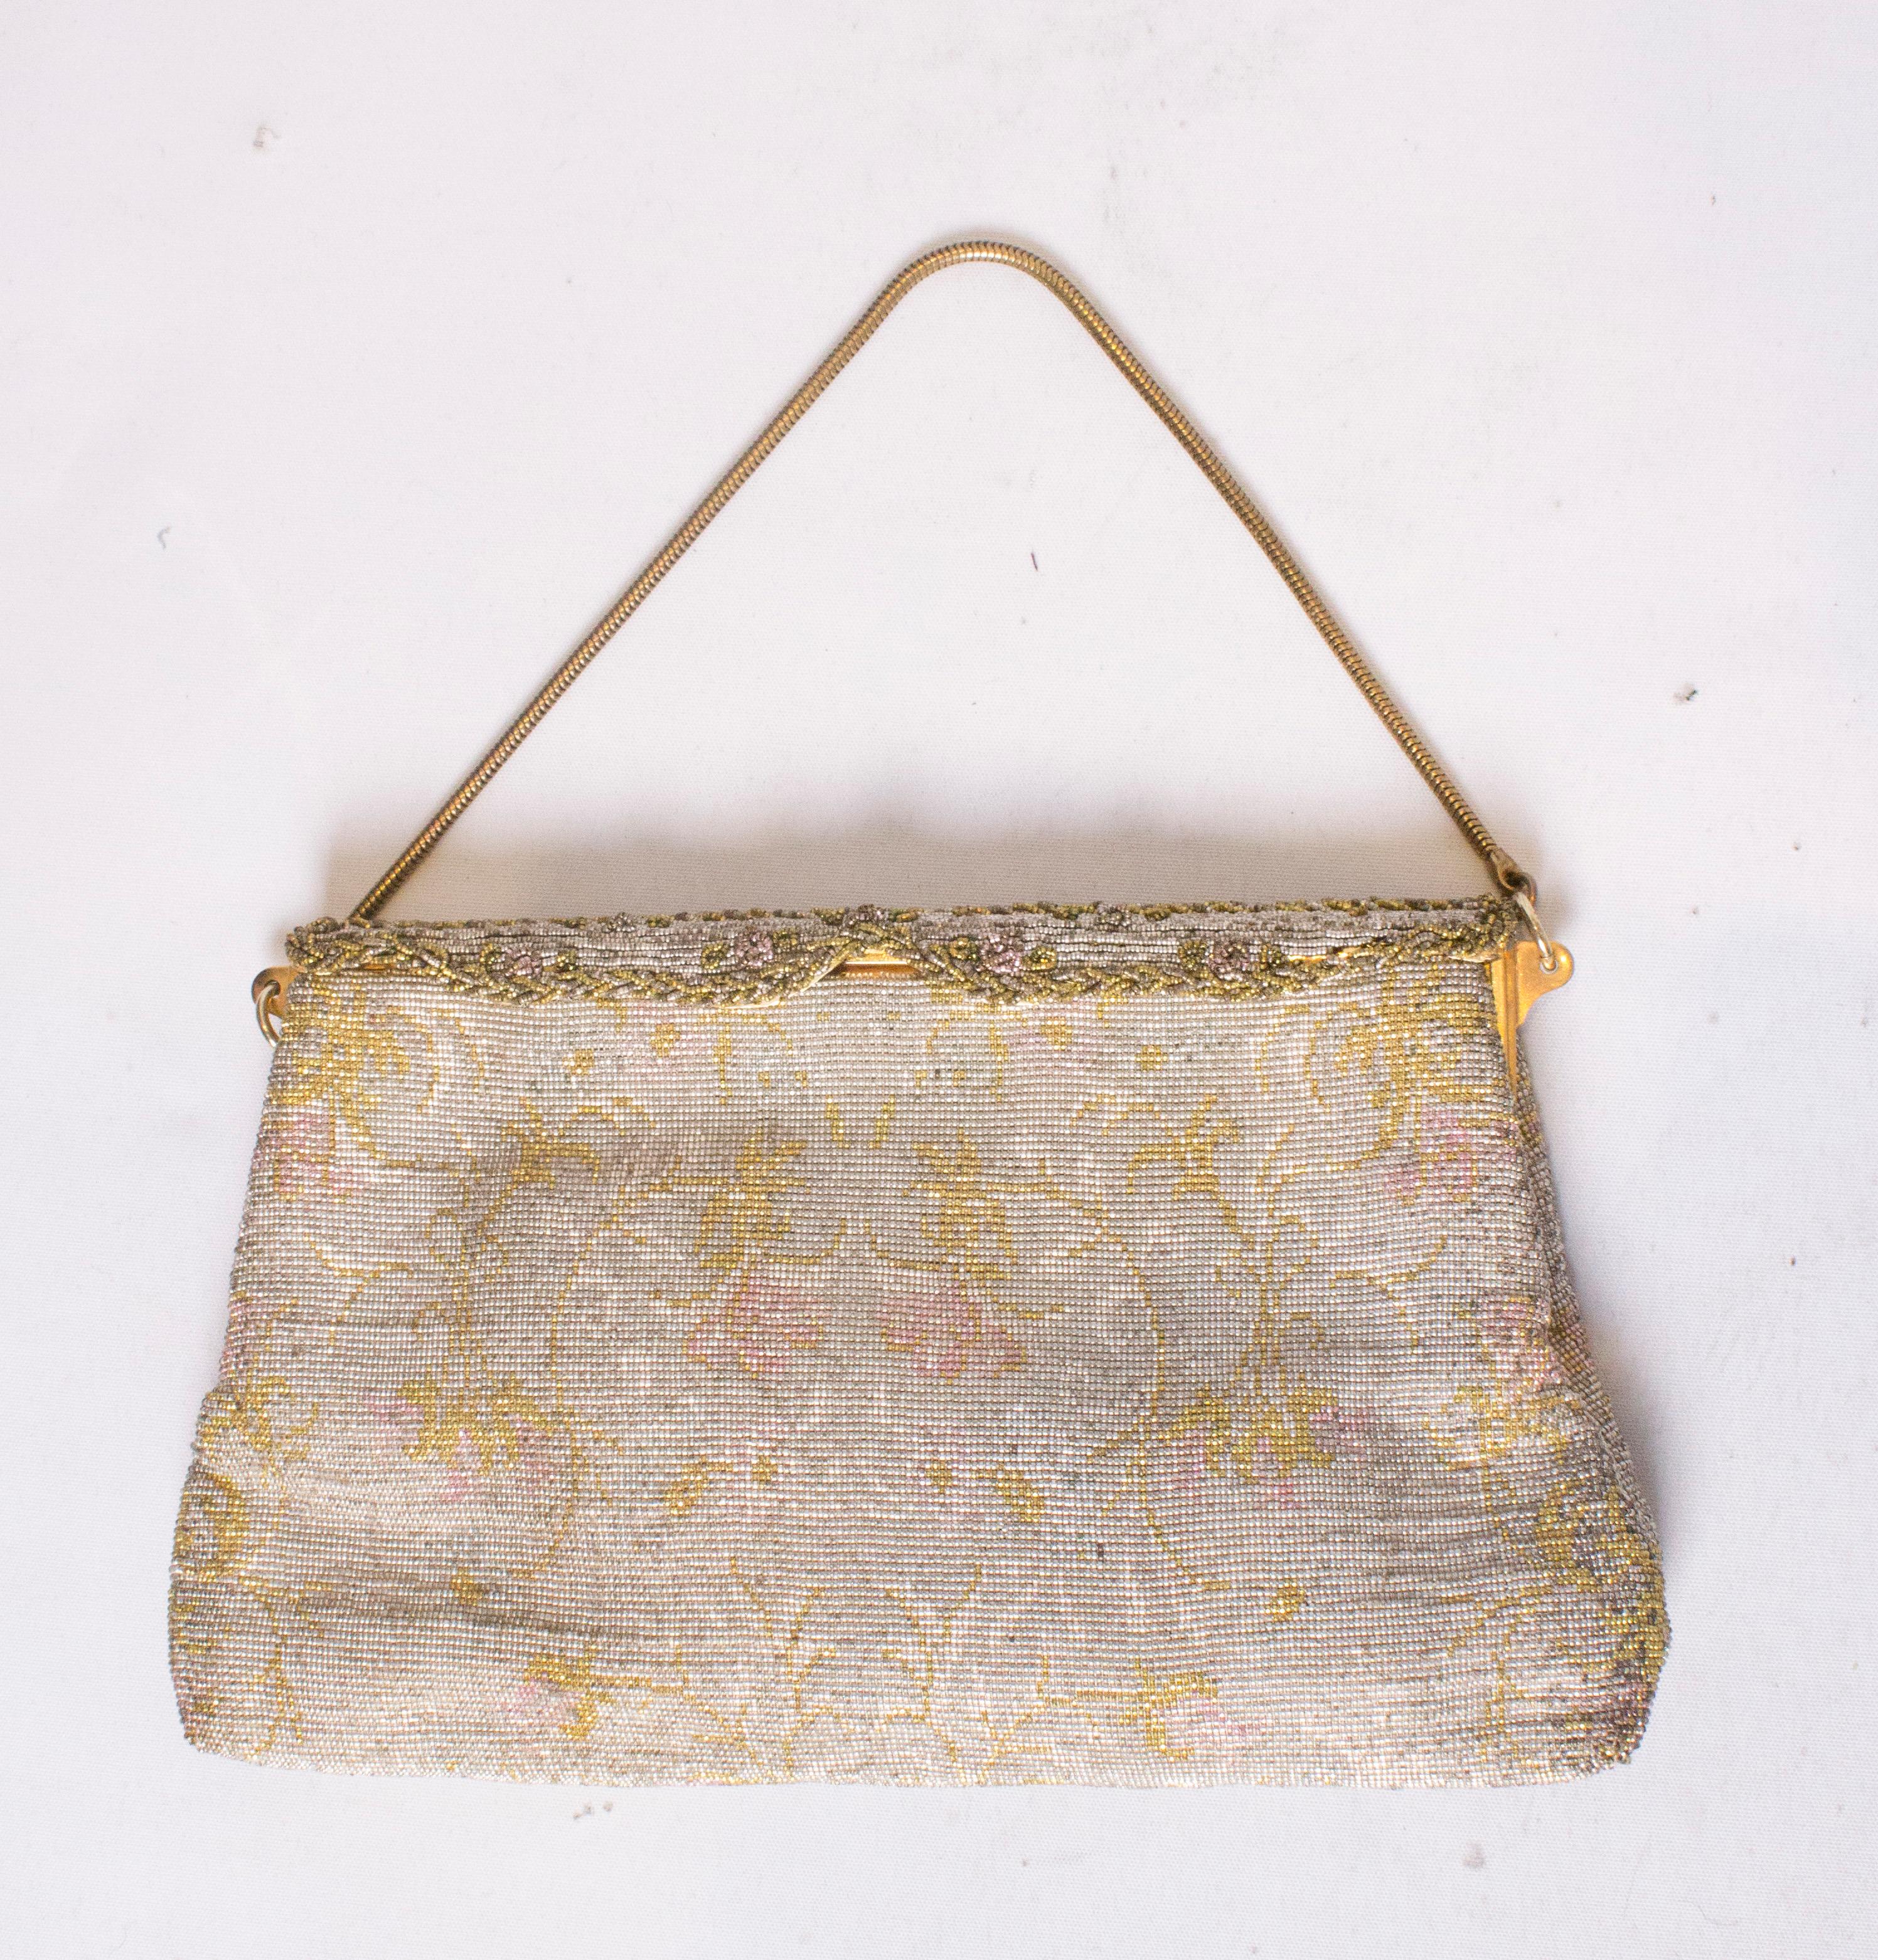 A stunning vintage evening bag is cut steel. The bag has a shaped fold over front, and is lined in satin with two pouch pockets. It has a silver /grey  background with a  pink and yellow  design. Measurements: width 9 1/2'', height 6''.